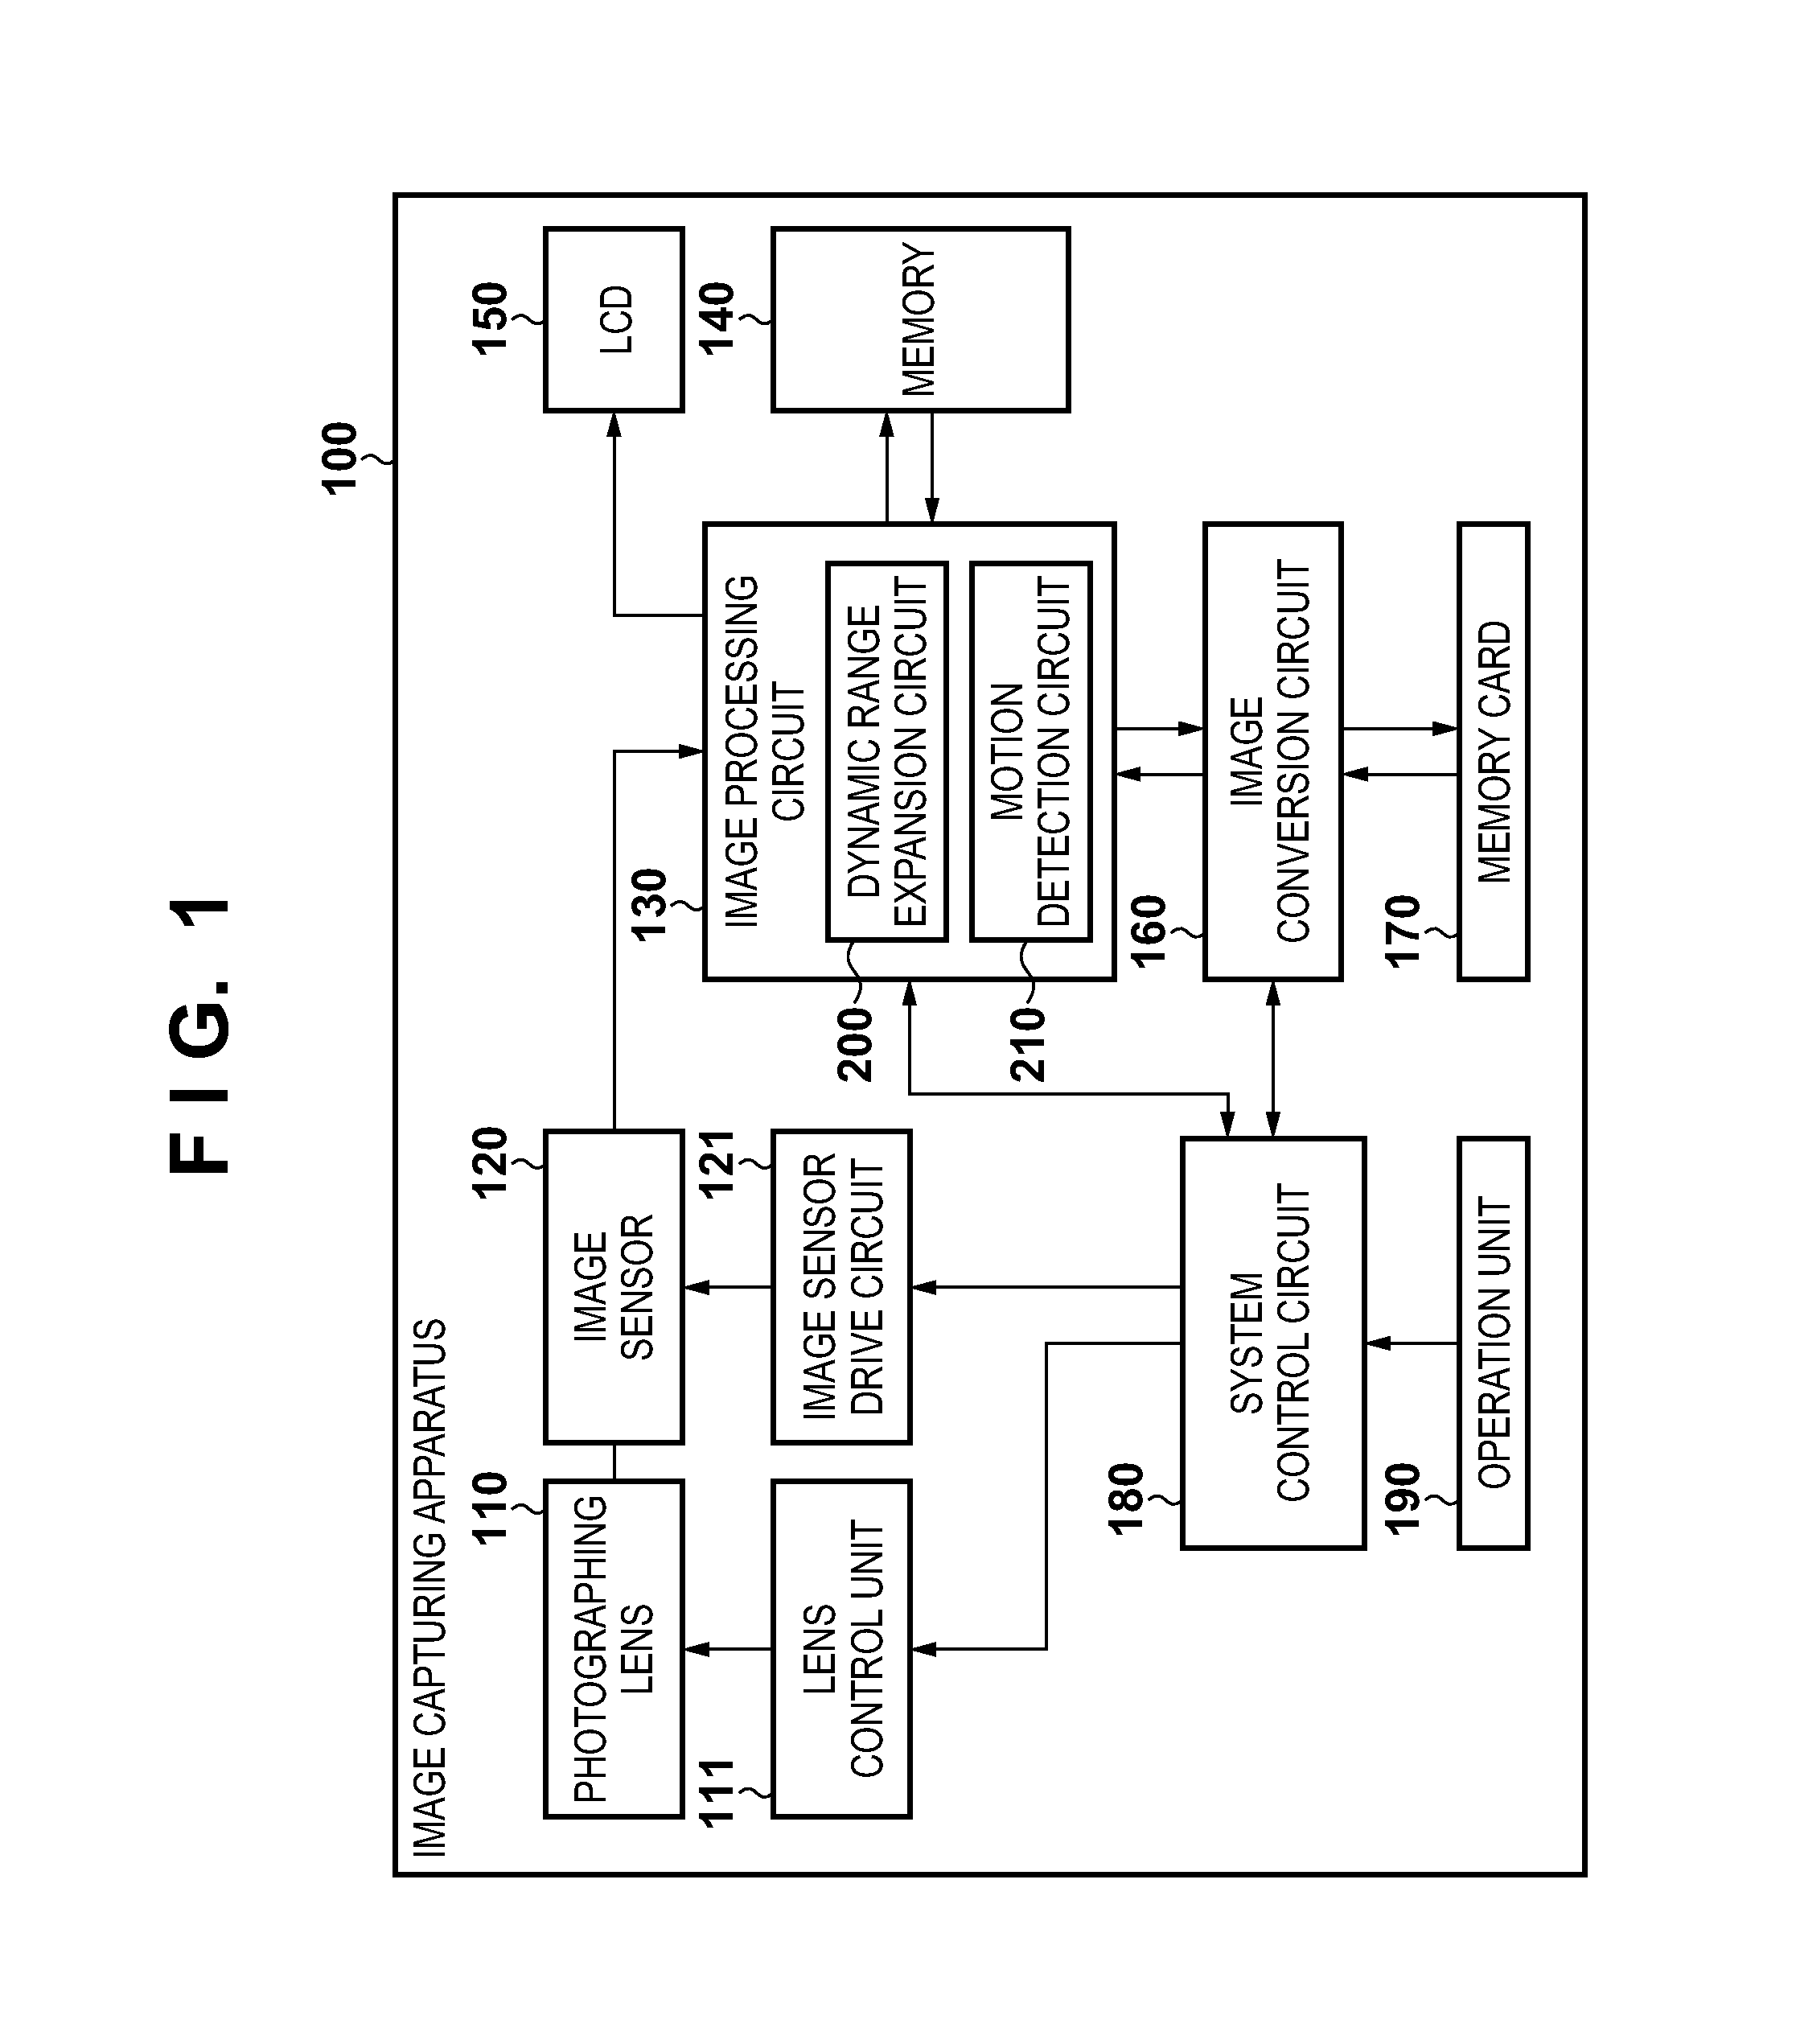 Image capturing apparatus for generating composite image and control method thereof